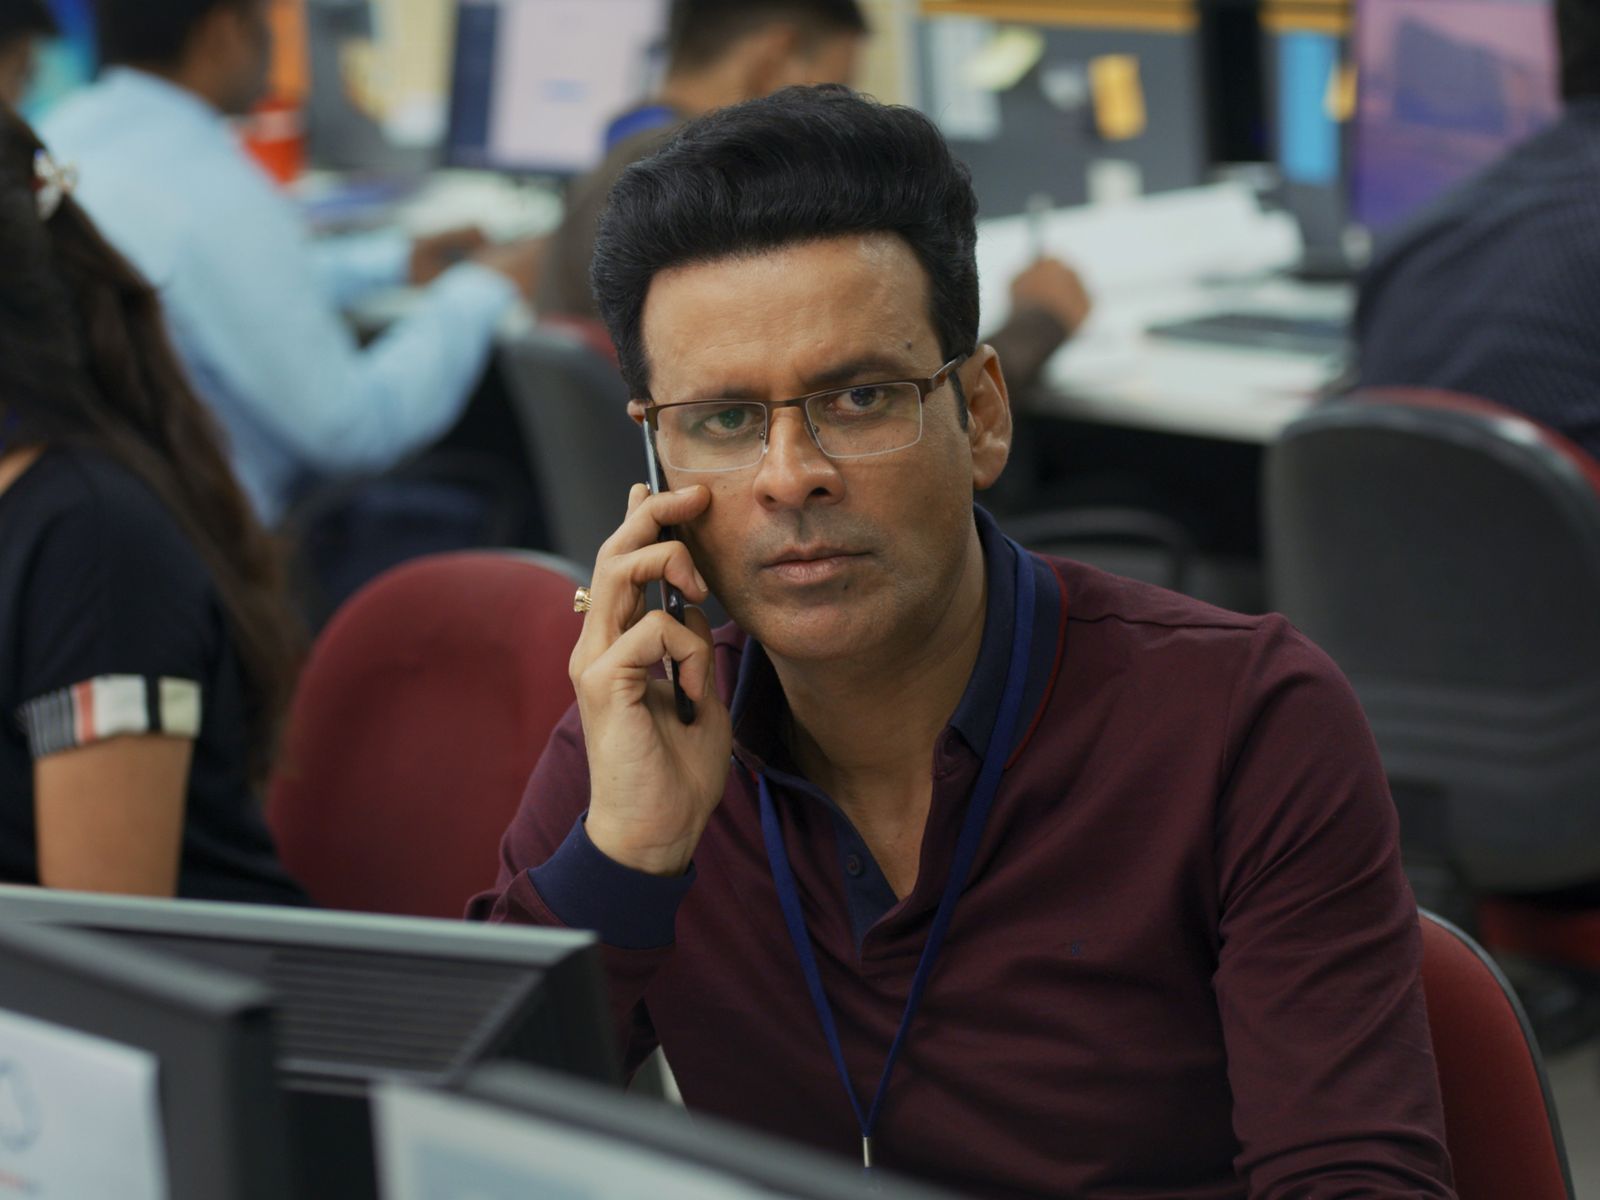 Manoj Bajpayee reveals he's been threatened & bullied by callers early in his career: 'They used to call at odd hours'